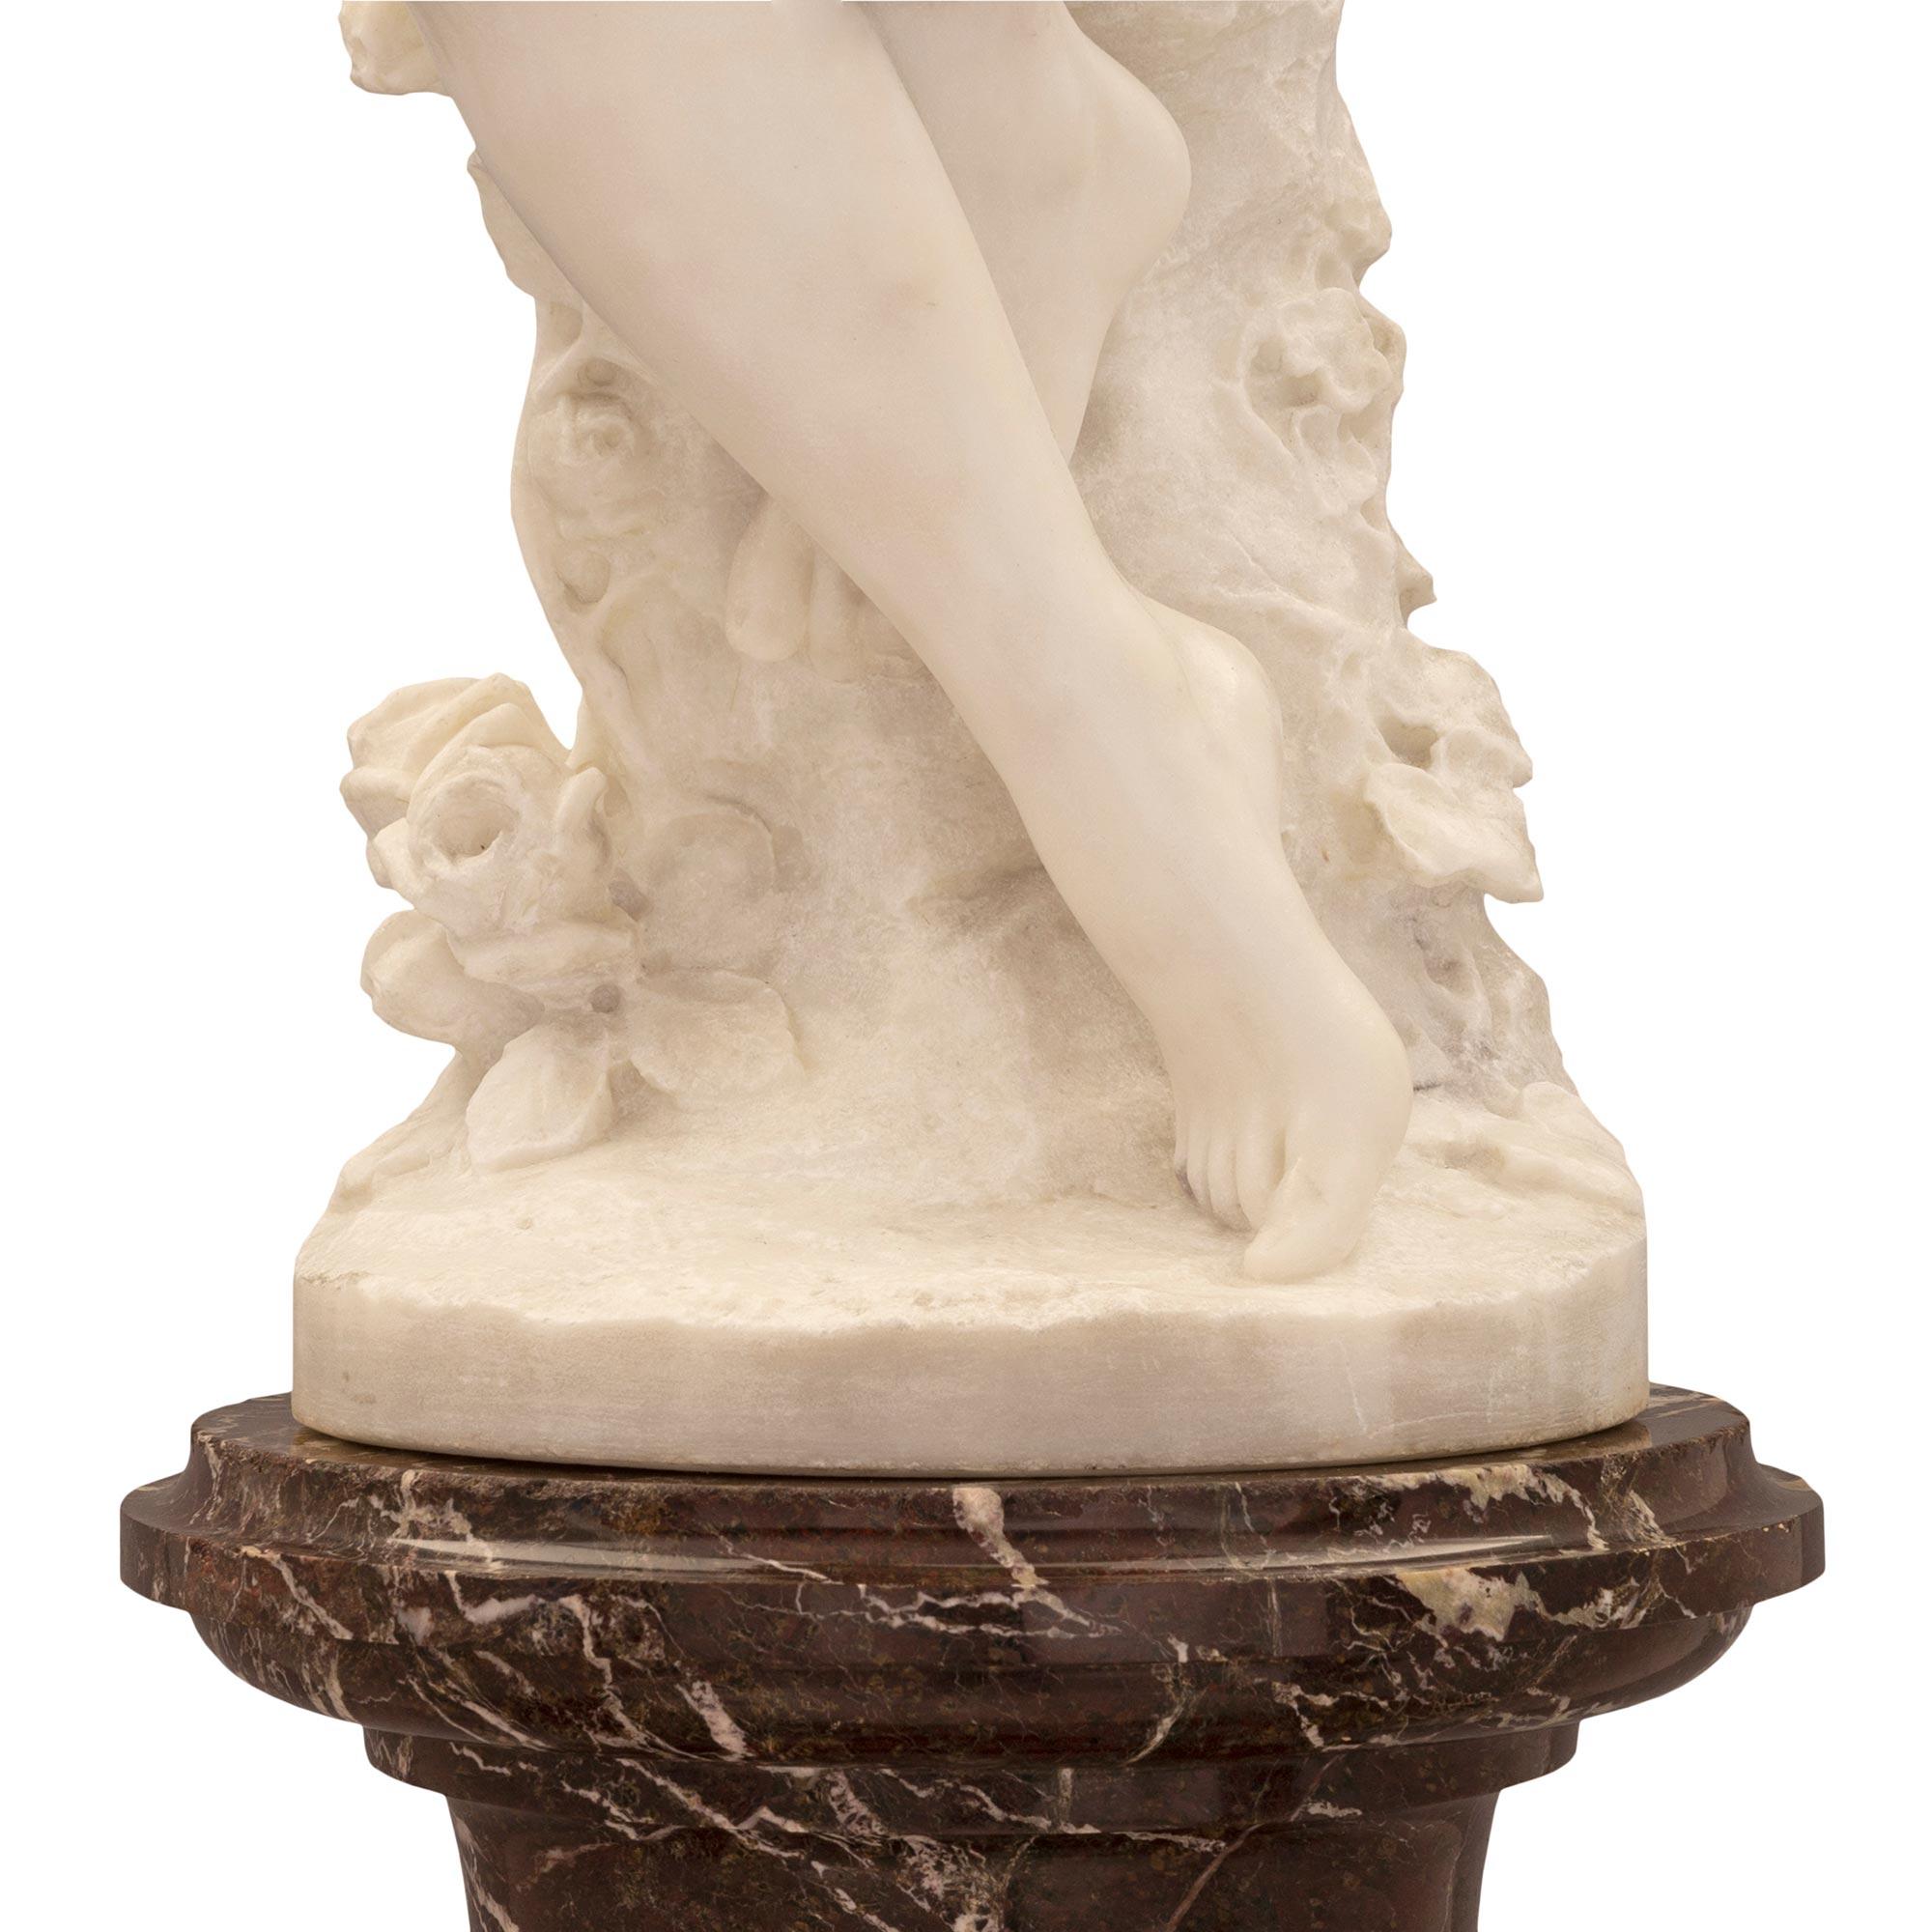 Italian 19th Century Marble Statue of Psyche on Her Original Pedestal For Sale 7